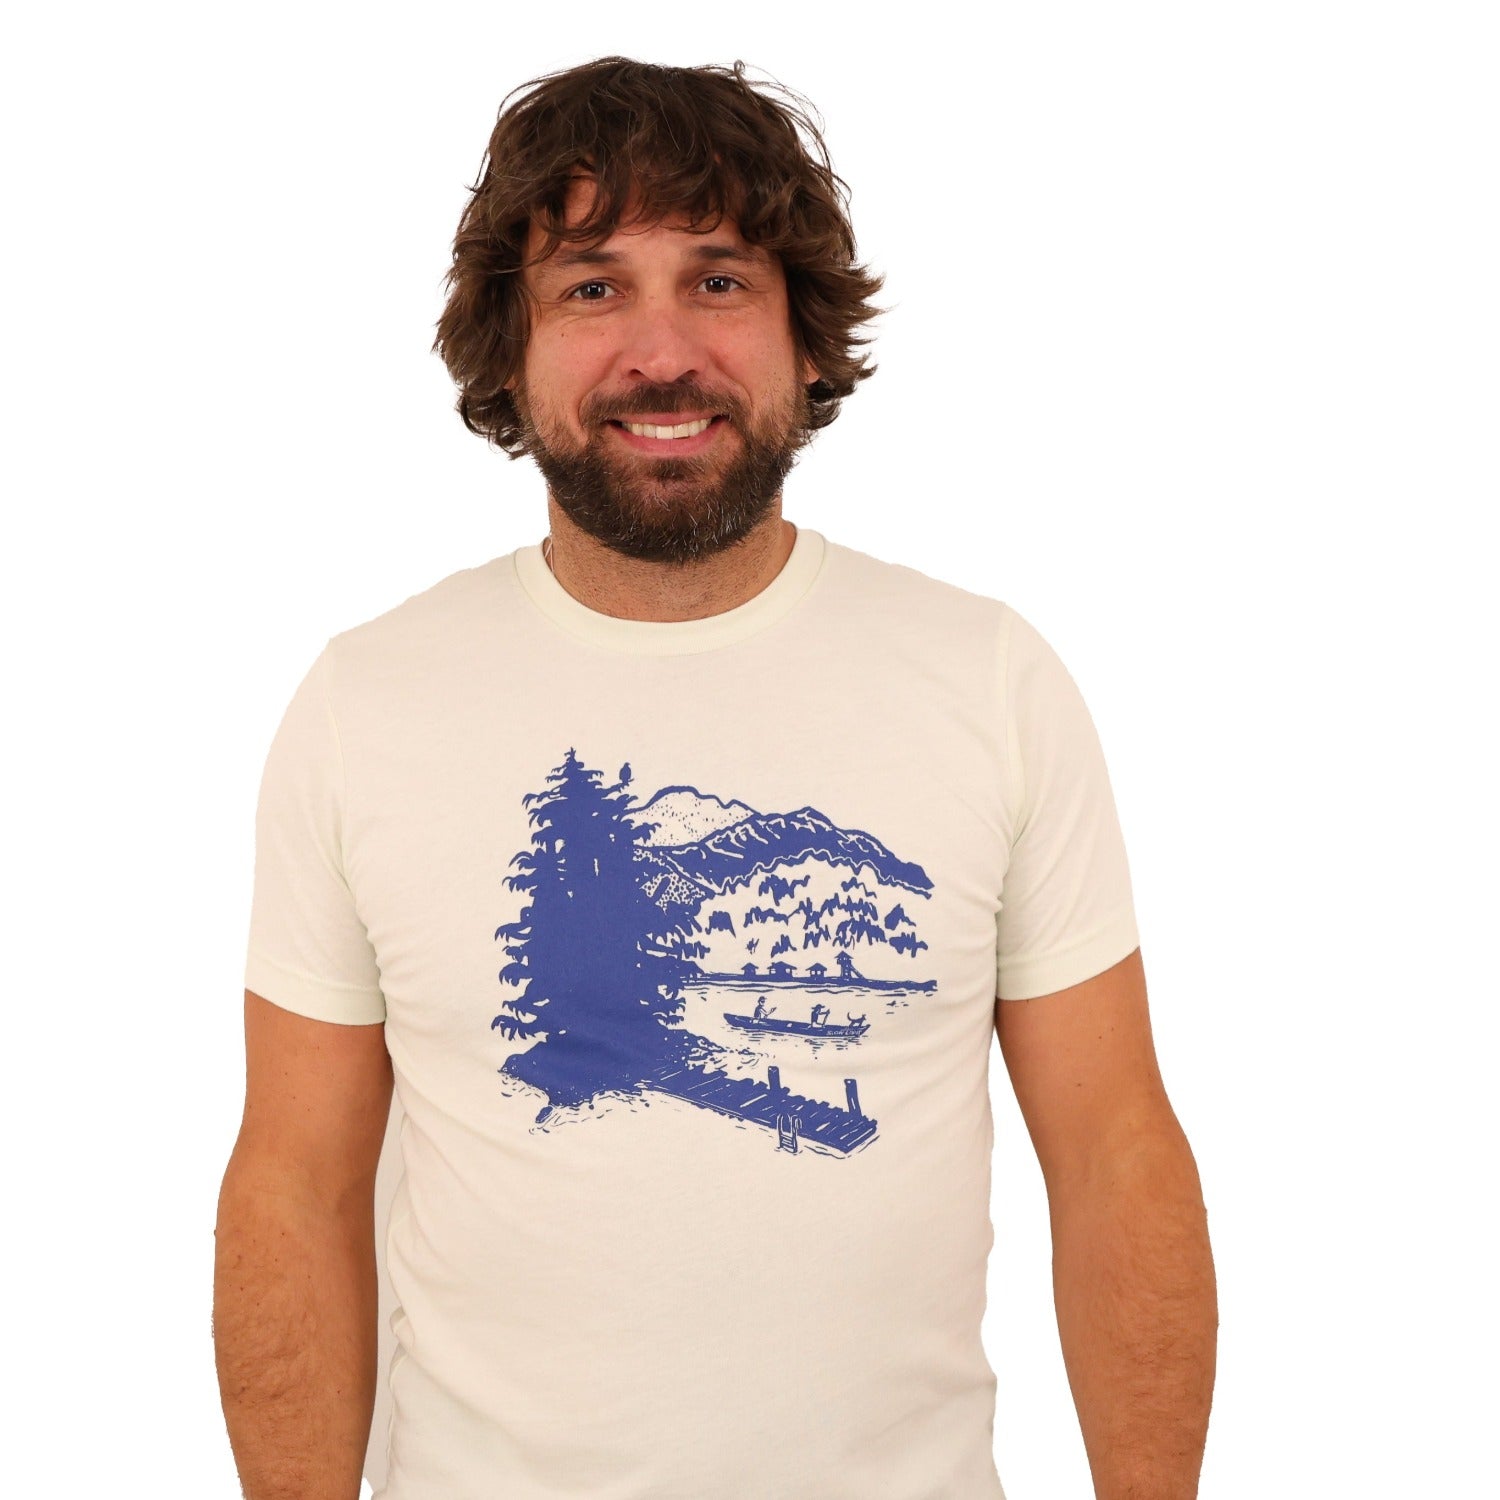 Man wearing citron(light tan) t-shirt with blue print of lake scene with a dock, canoe, trees, mountains, etc.